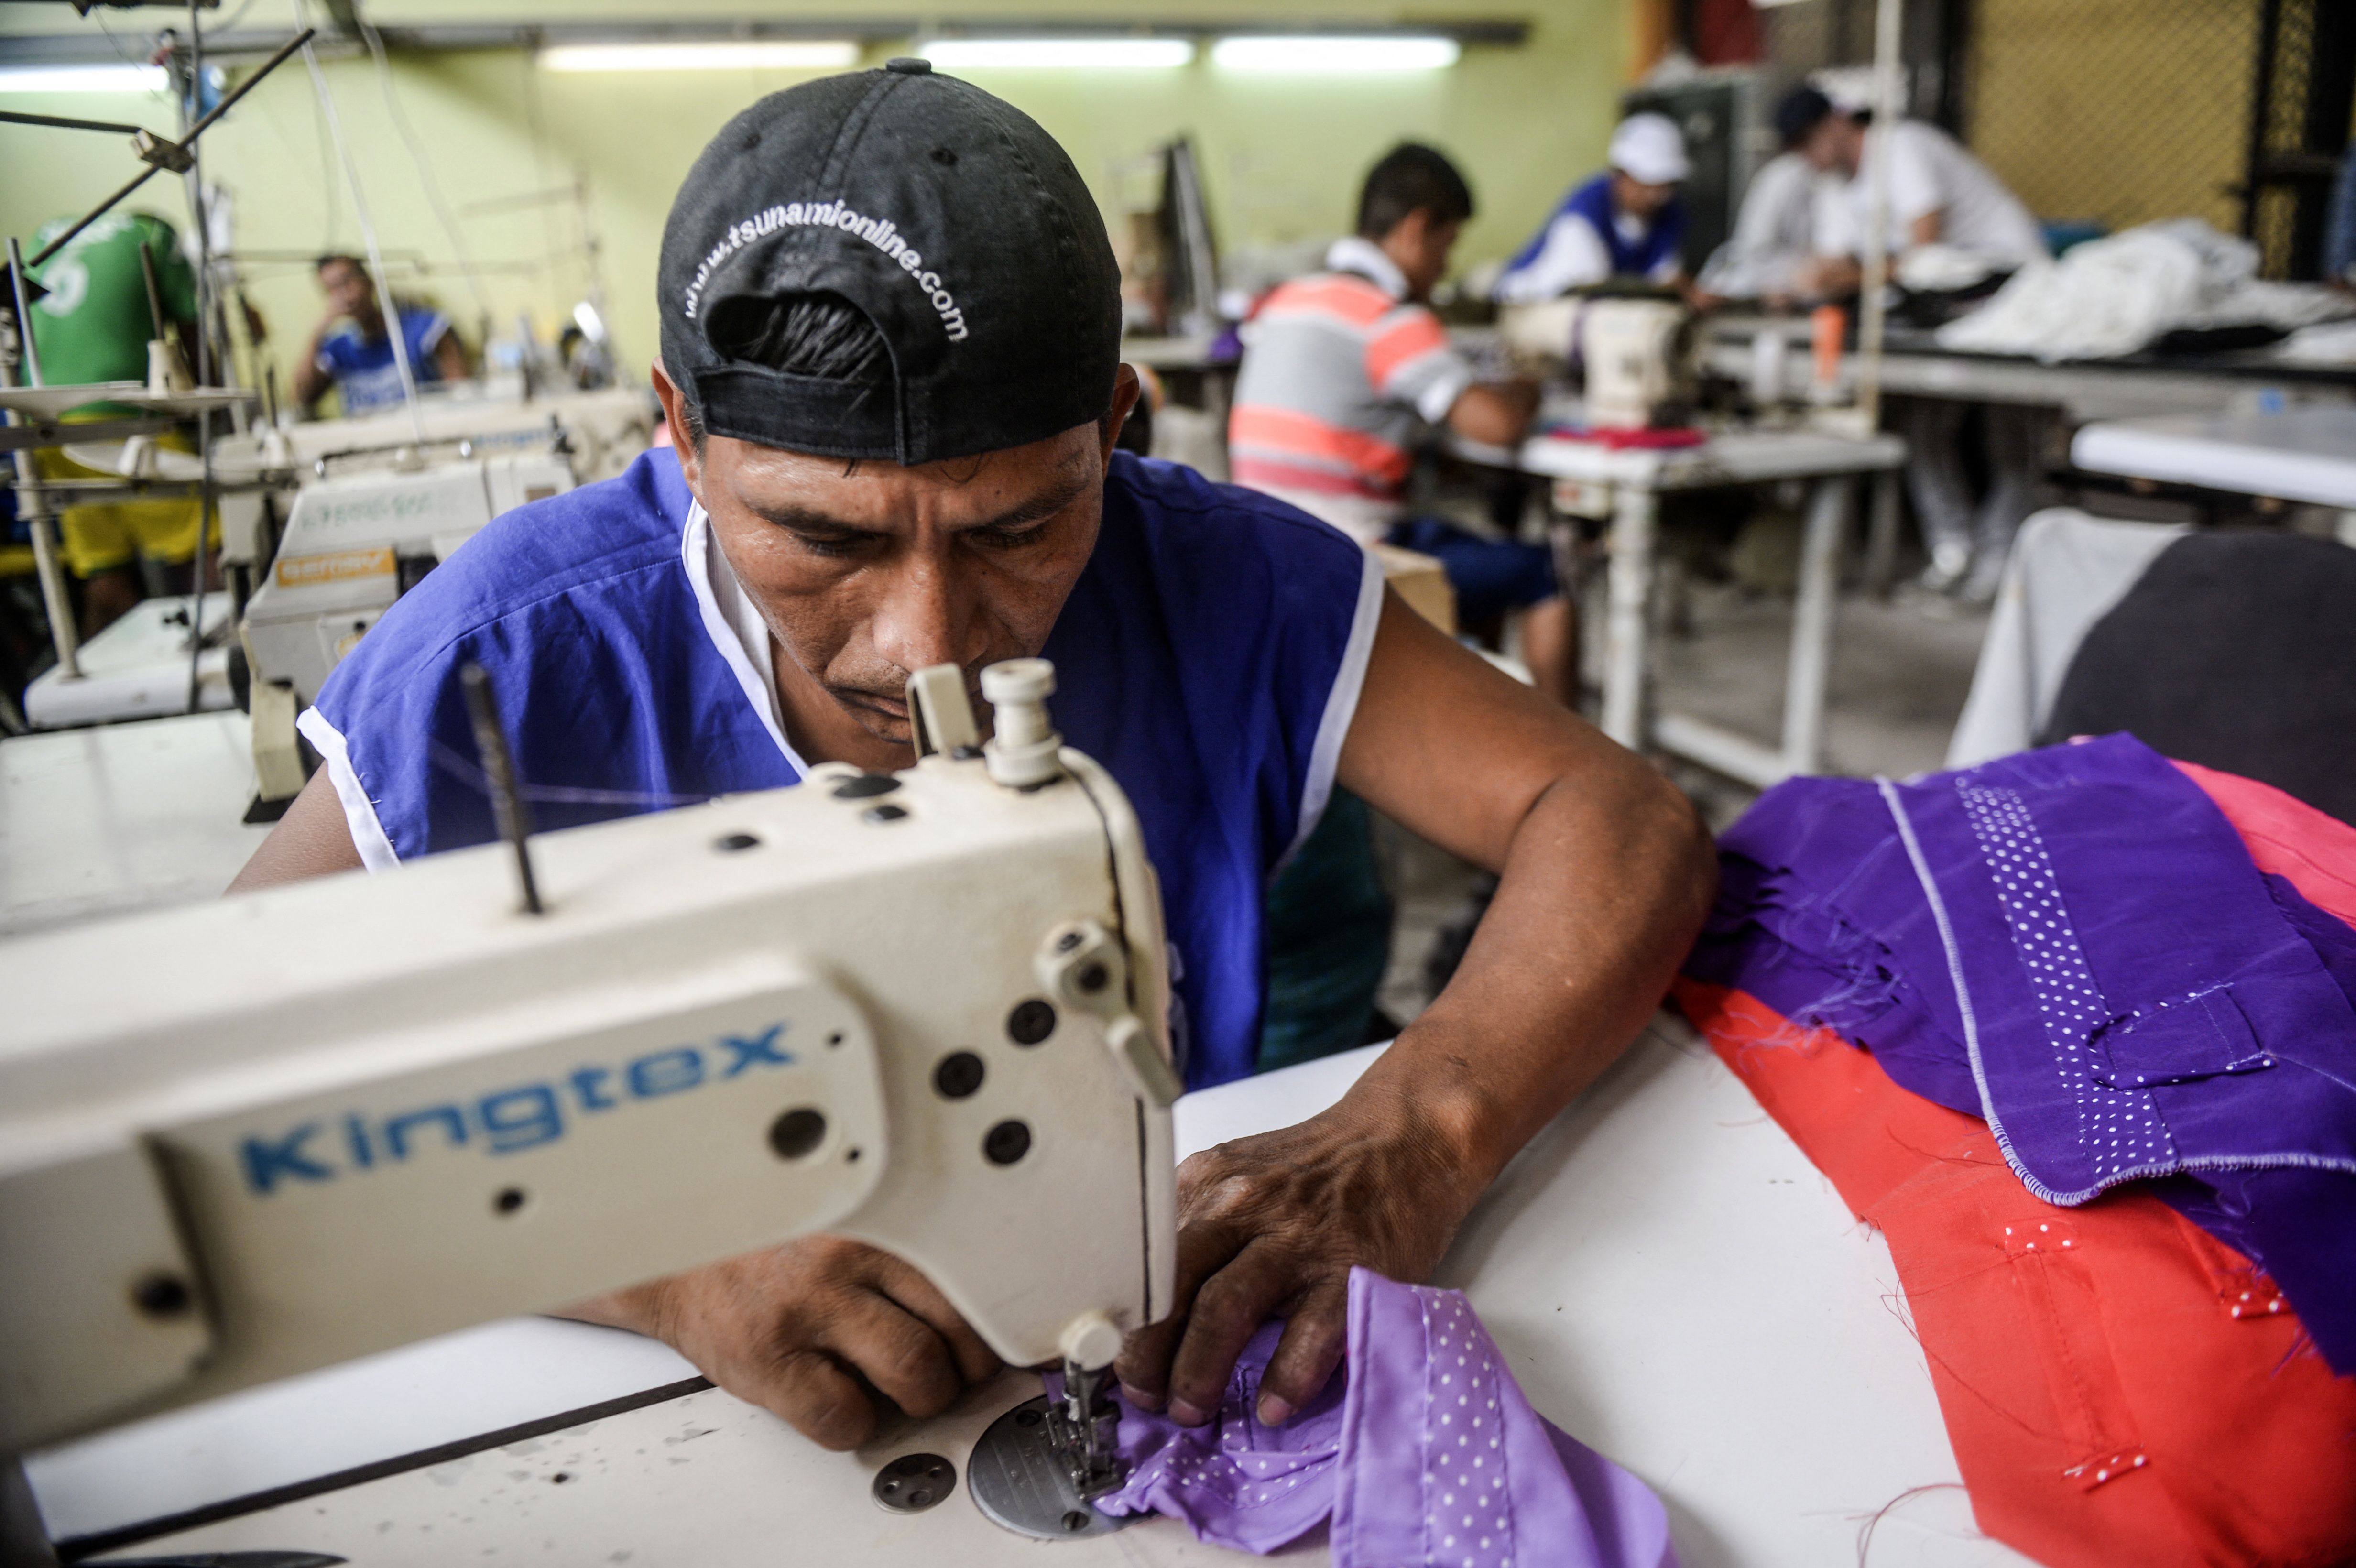 An inmate taking part in the social project "Pieta", led by French designer Thomas Jacob, sews at the San Pedro prision in Lima on March 1, 2016. - With the help of 29-year-old French fashionista Jacob who cut his teeth at Chanel, inmates at San Pedro and a women's prison across town, Santa Monica, have launched their own clothing label, seeking to bring their urban style to the world and find redemption in fashion. (Photo by ERNESTO BENAVIDES / AFP) (Photo by ERNESTO BENAVIDES/AFP via Getty Images)